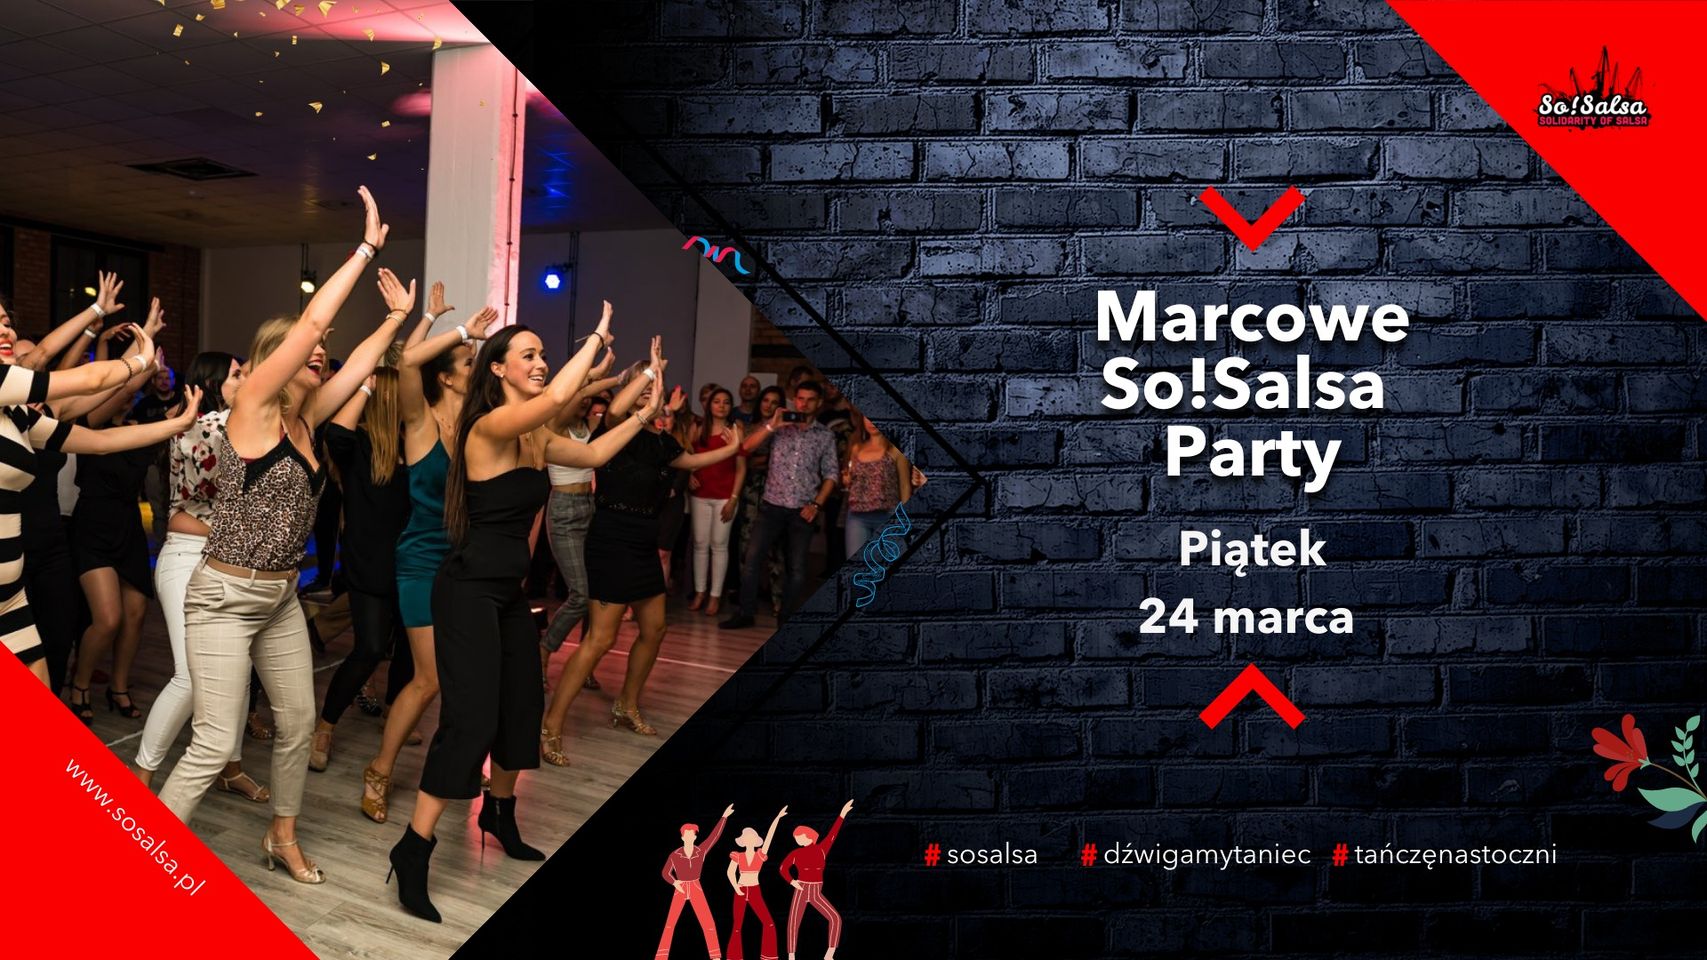 Marcowe So!Salsa Party